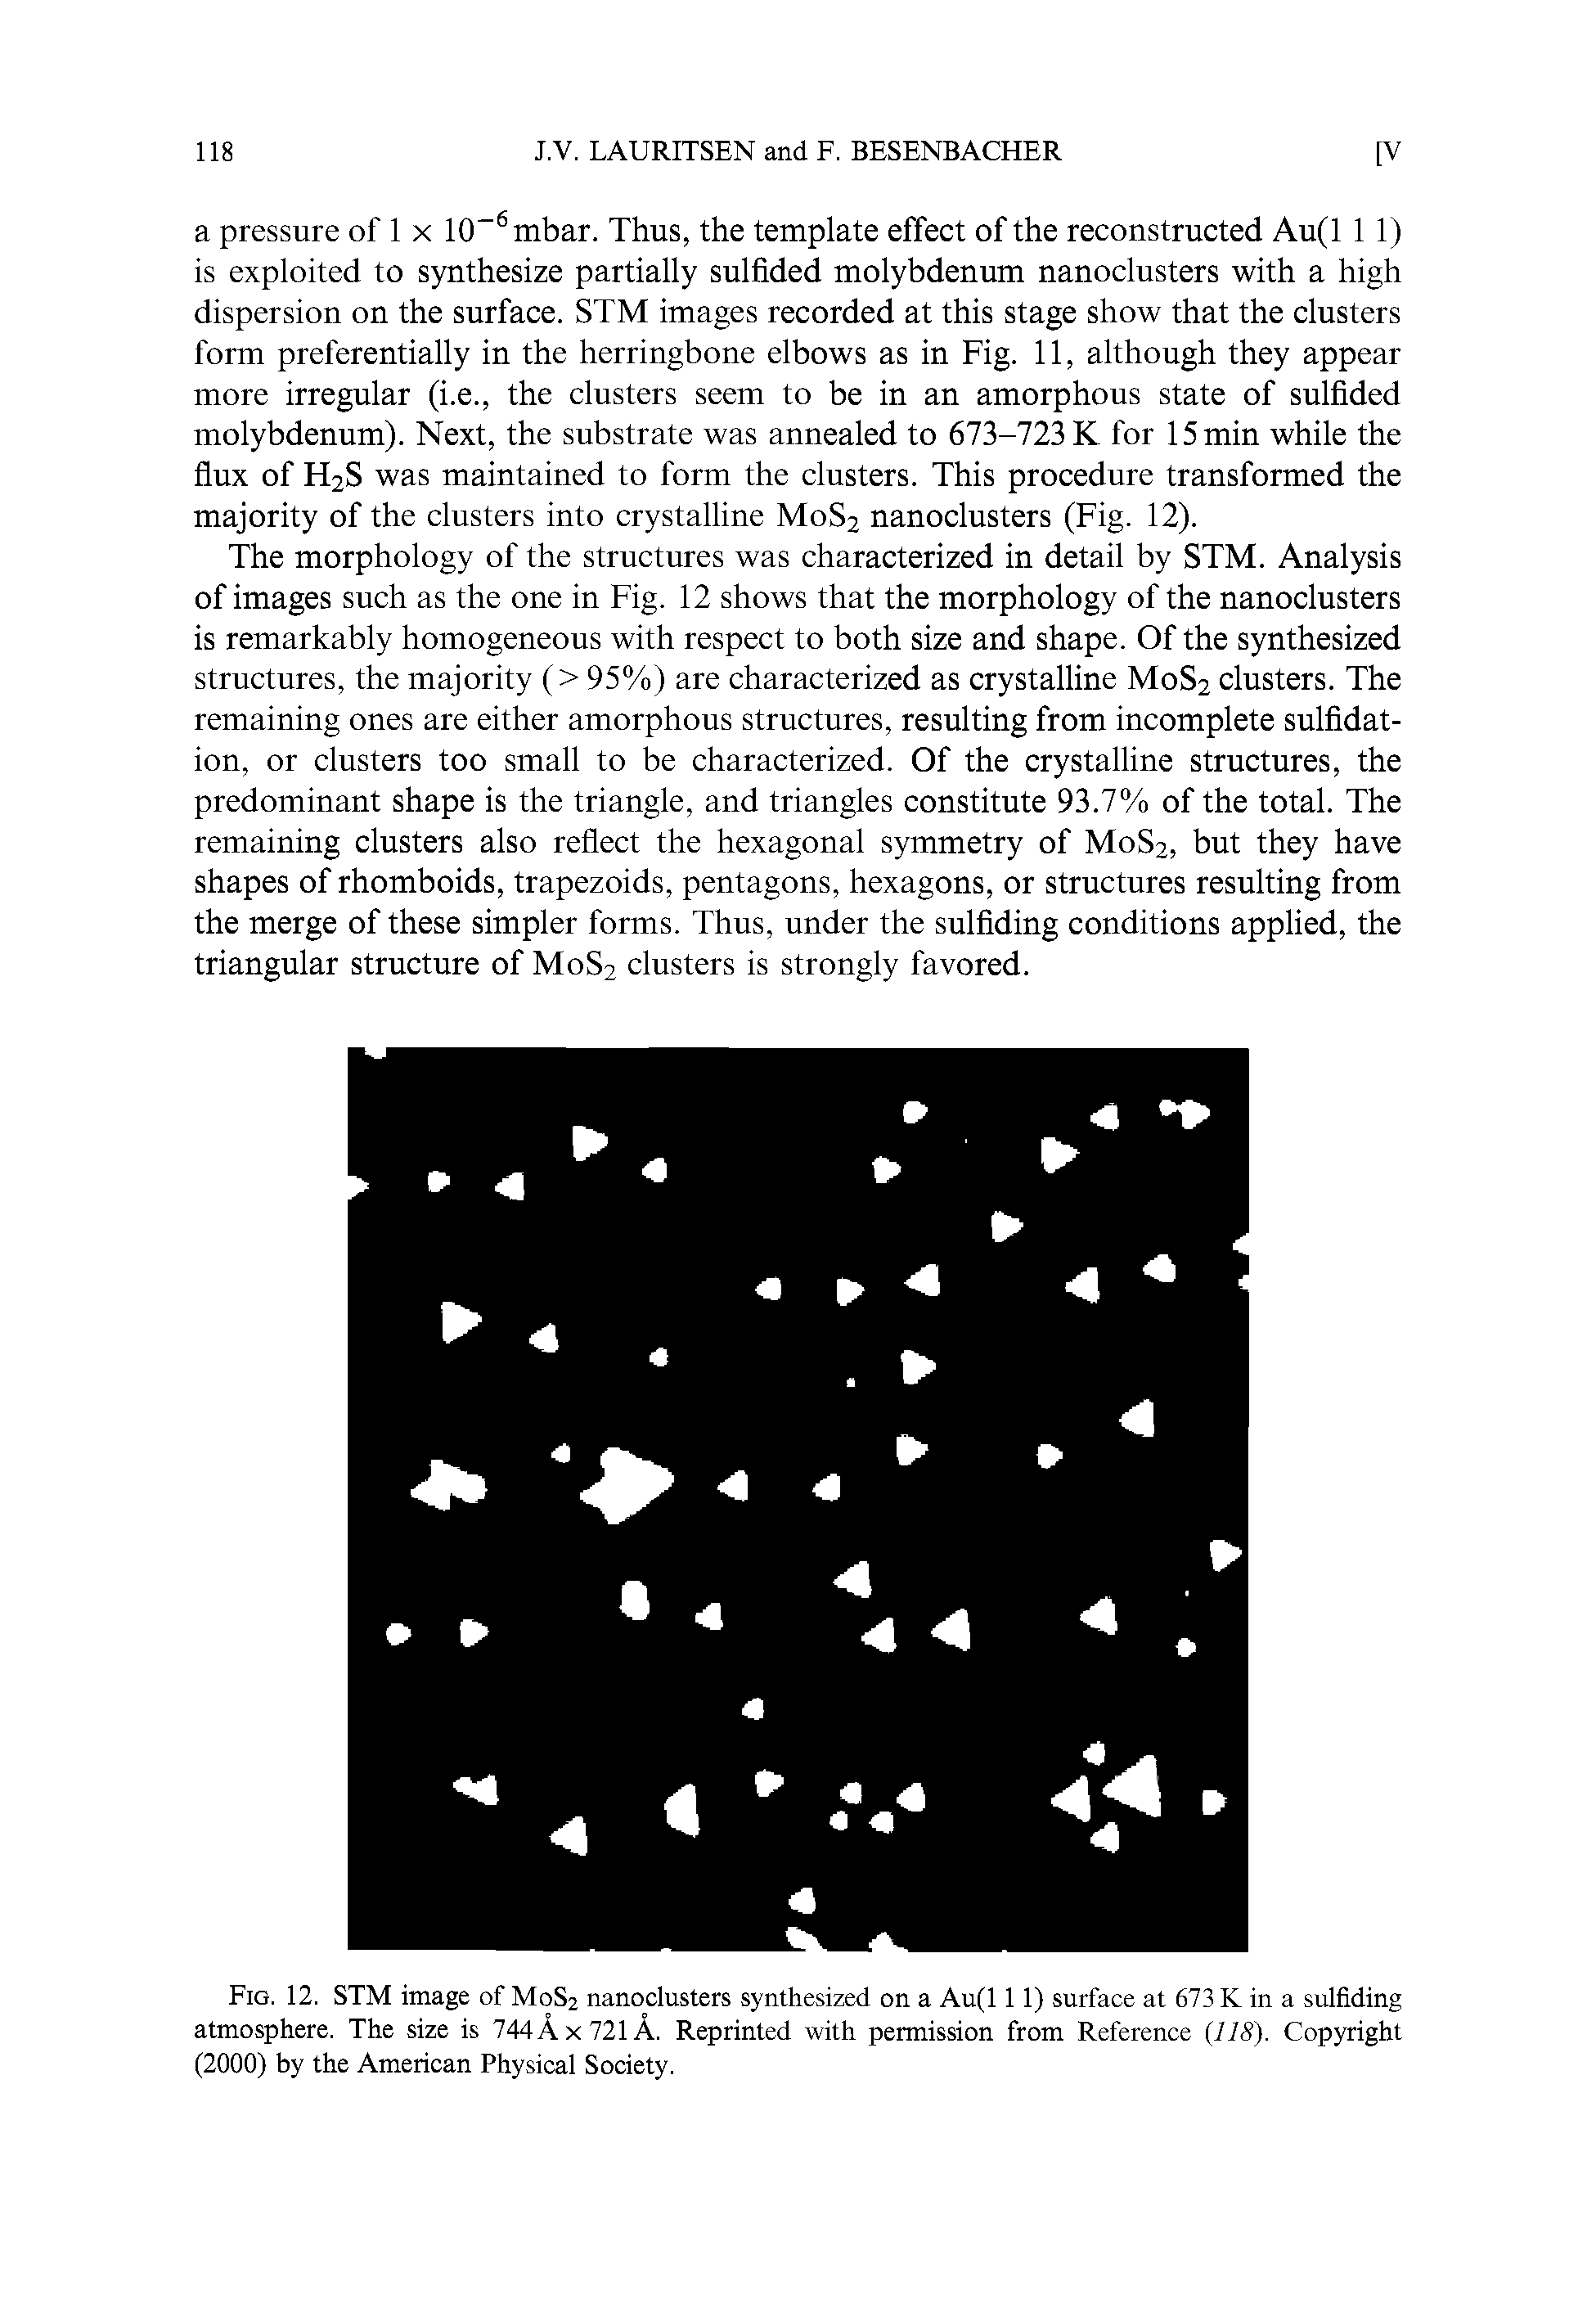 Fig. 12. STM image of M0S2 nanoclusters synthesized on a Au(l 1 1) surface at 673 K in a sulfiding atmosphere. The size is 744Ax721A. Reprinted with permission from Reference (US ). Copyright (2000) by the American Physical Society.